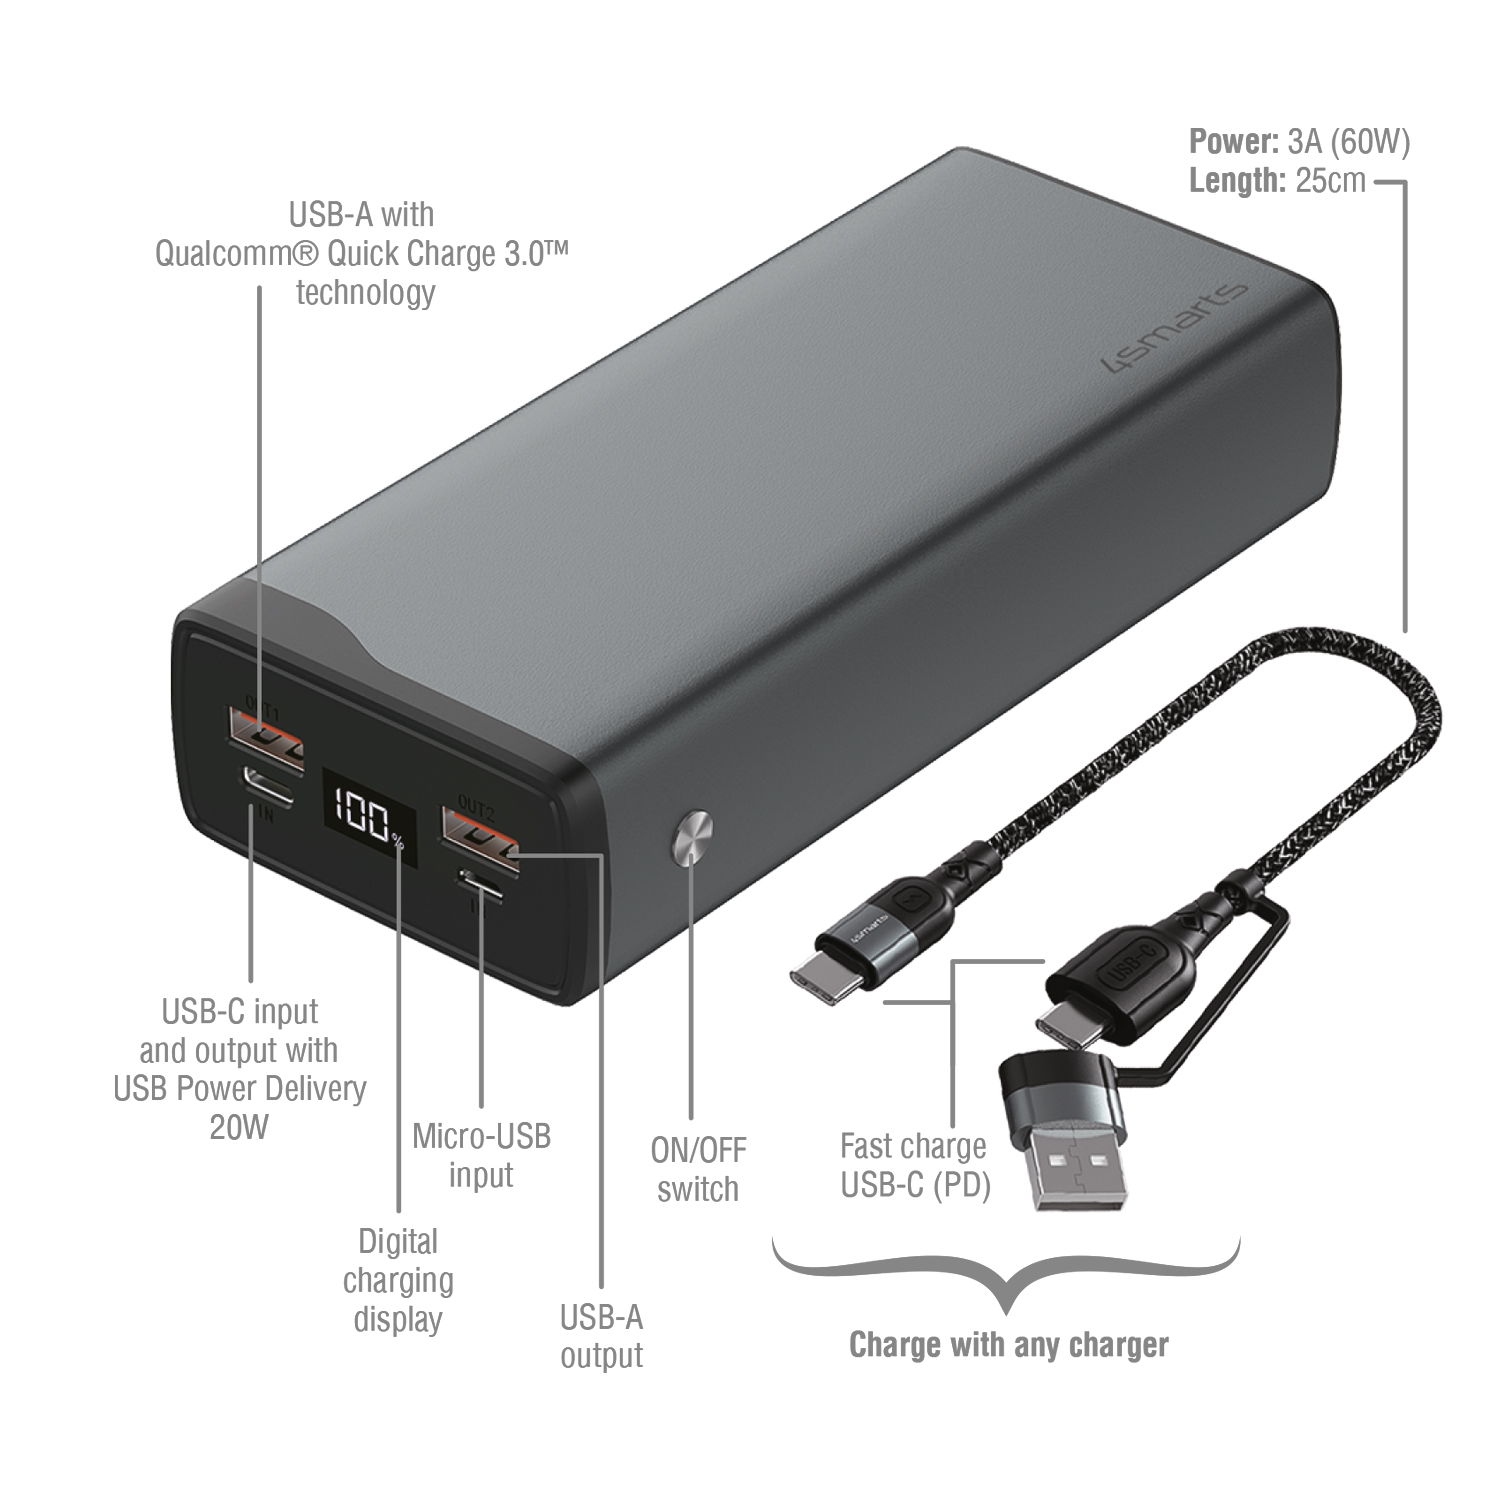 The VoltHub Pro 10000mAh 22.5 W powerbank from 4smarts is equipped with multiple ports and offers a variety of ways to charge the battery.